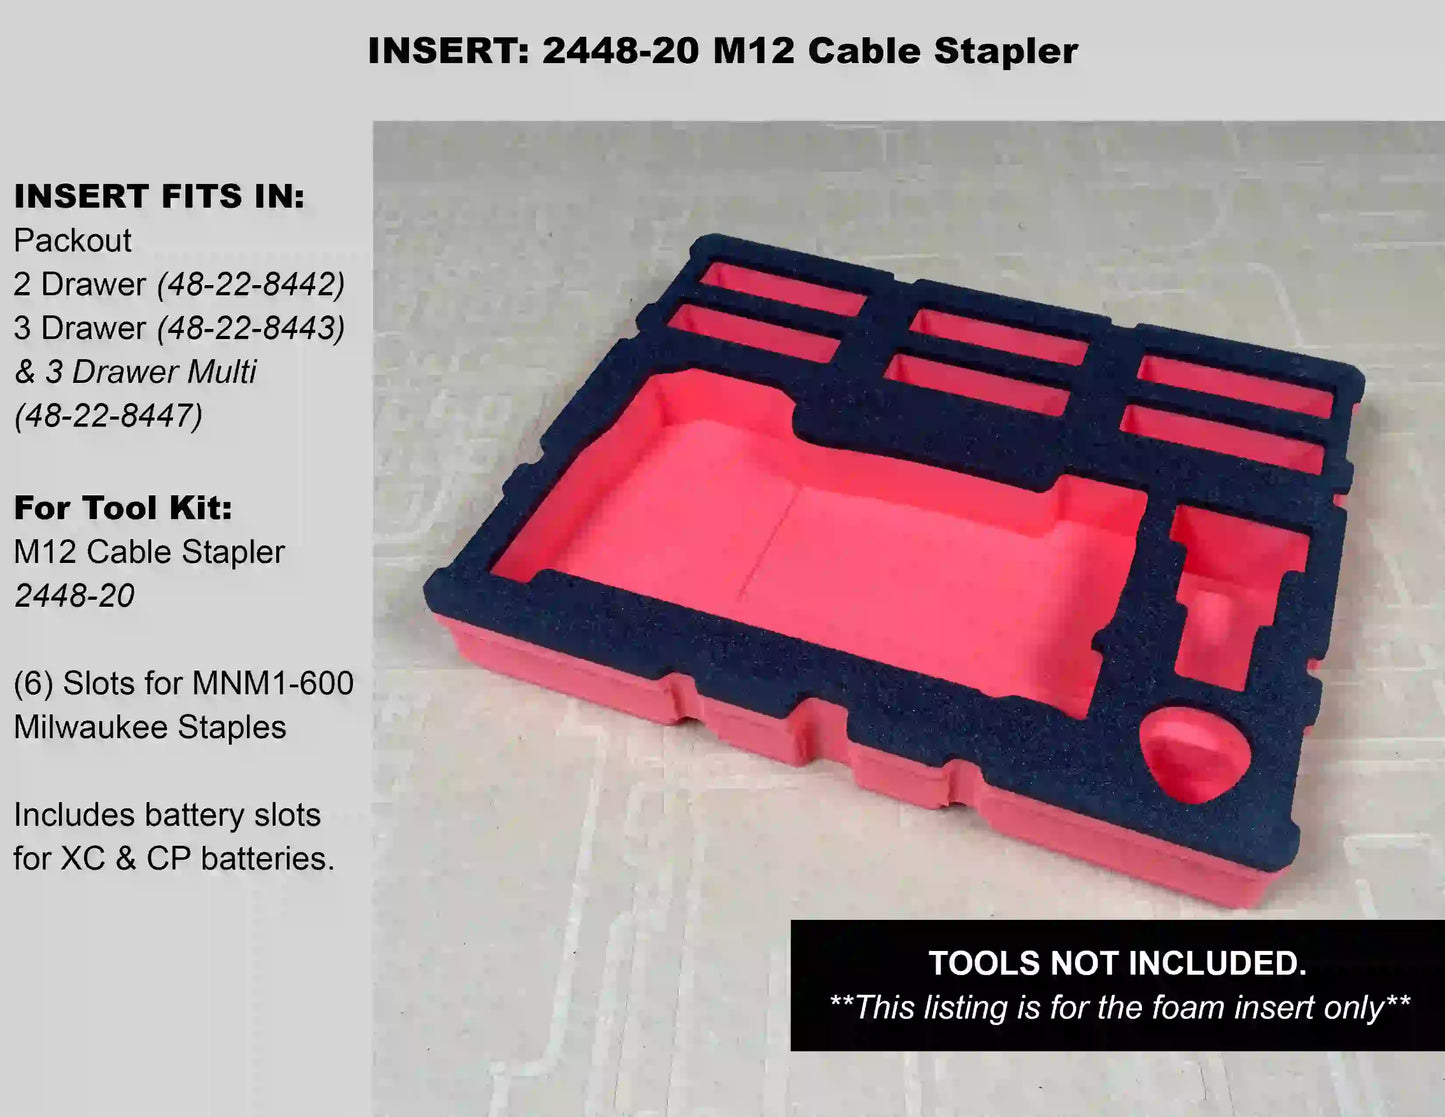 FOAM INSERT to store M12 Cable Stapler 2448-20 in a Milwaukee Packout 3 Drawer Tool Box - Tools NOT Included